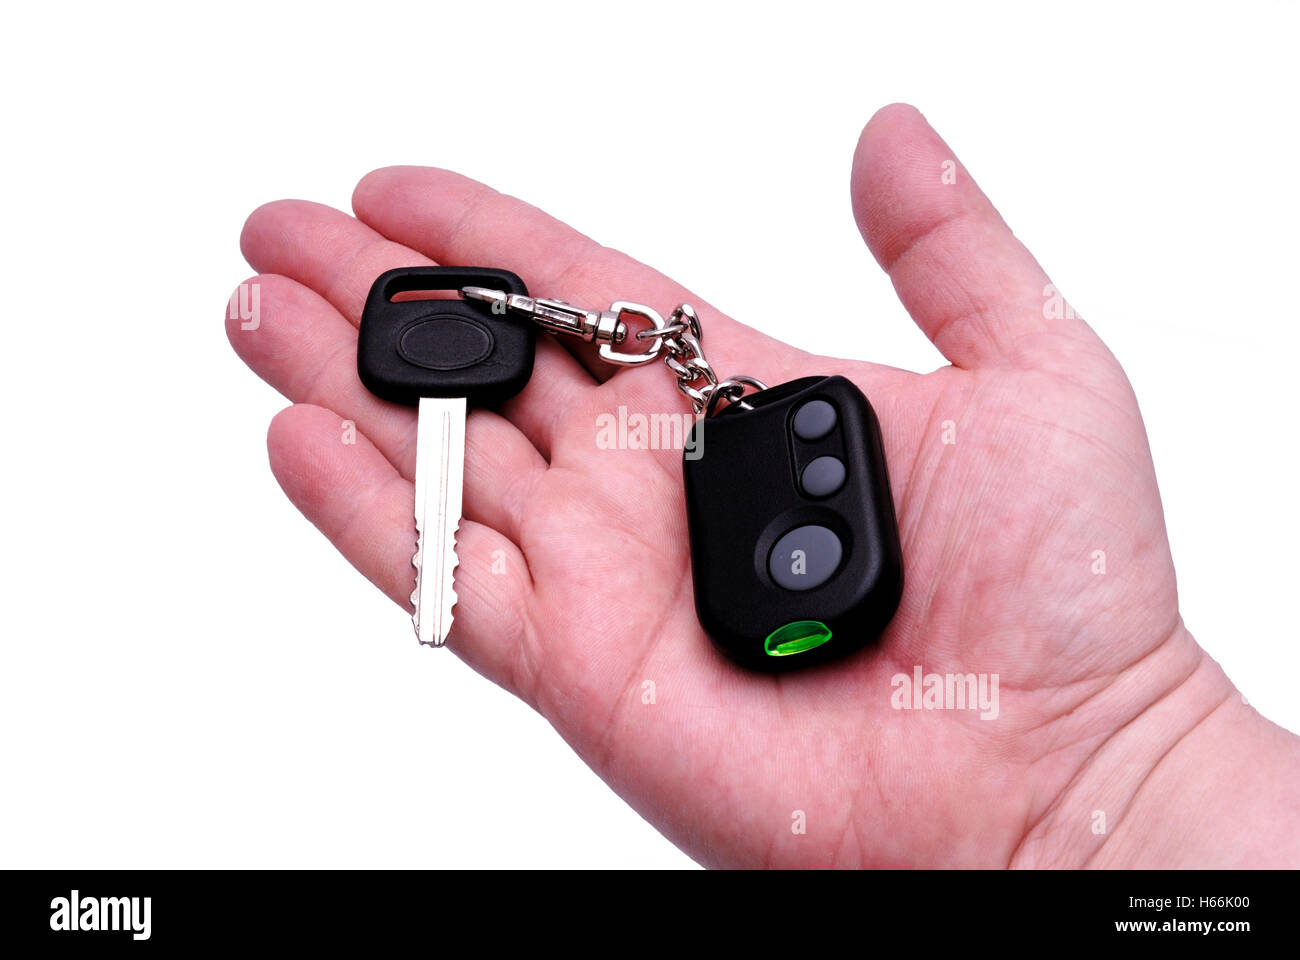 Automobile keys and remote control panel from the car alarm system in a hand. Stock Photo